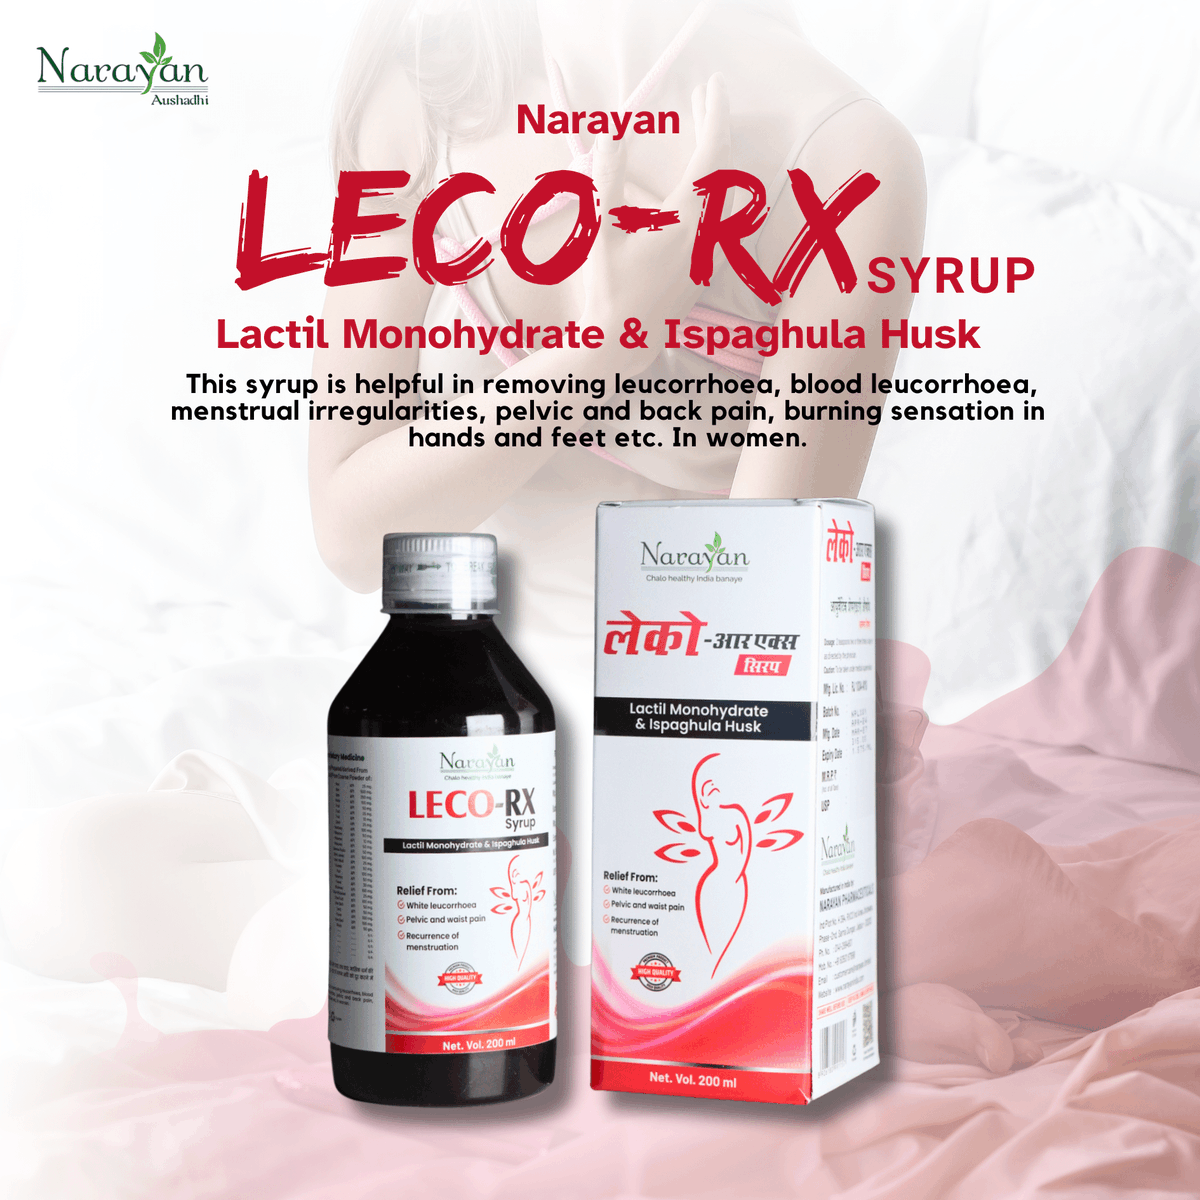 Narayan Leco-Rx Syrup is a gentle yet effective herbal solution formulated specifically for women's health concerns.
This unique blend, containing Lactiol Monohydrate & Isabgol husk, helps address a range of issues:
#NarayanLecoRx #WomensHealth #Leucorrhoea #MenstrualHealth